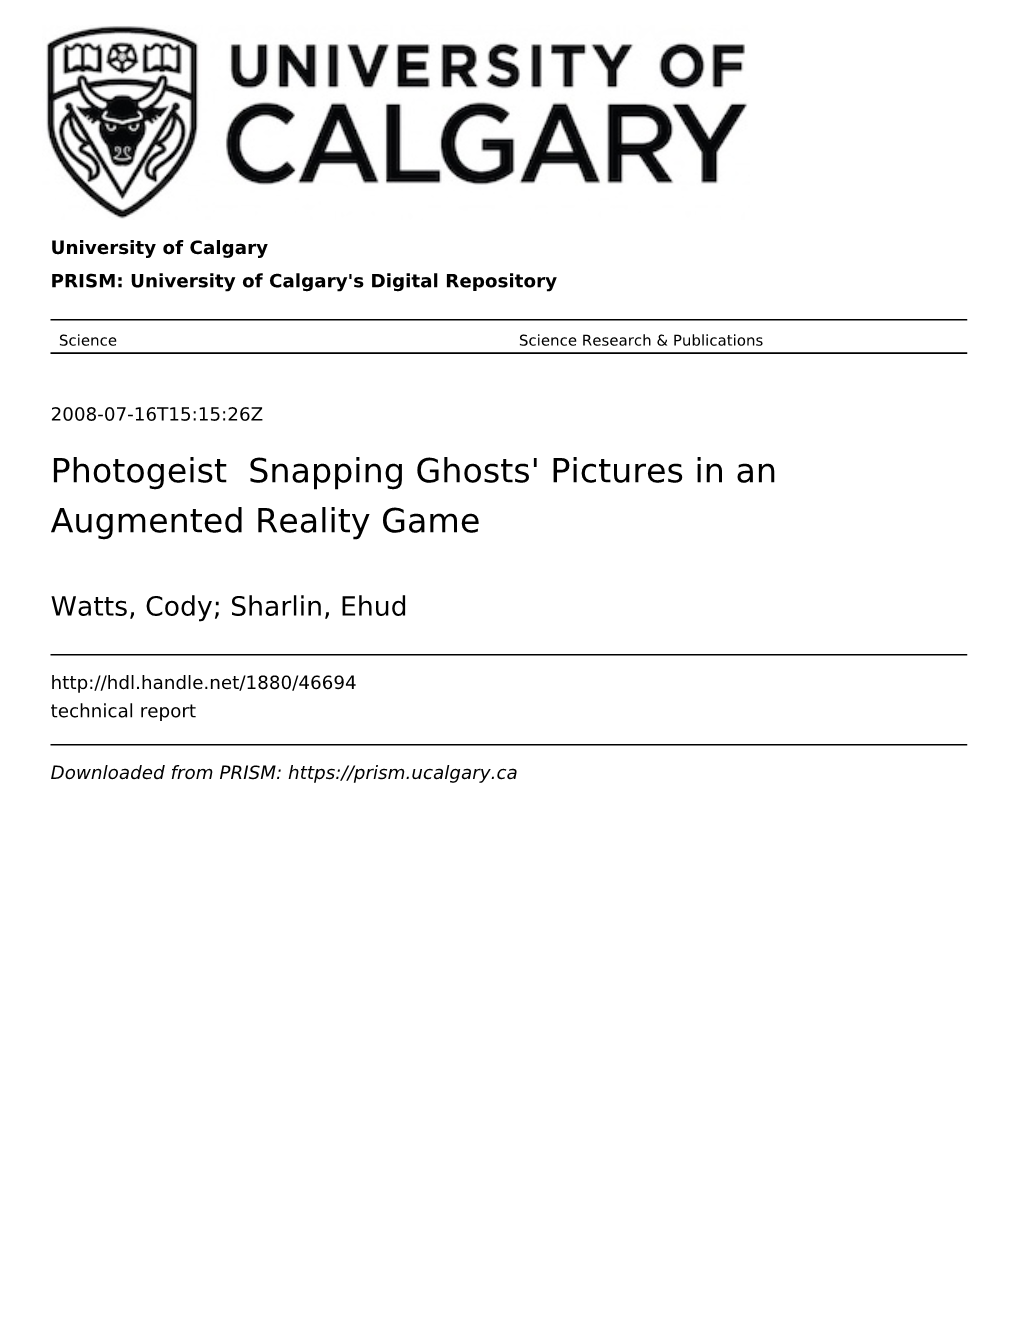 Photogeist Snapping Ghosts' Pictures in an Augmented Reality Game